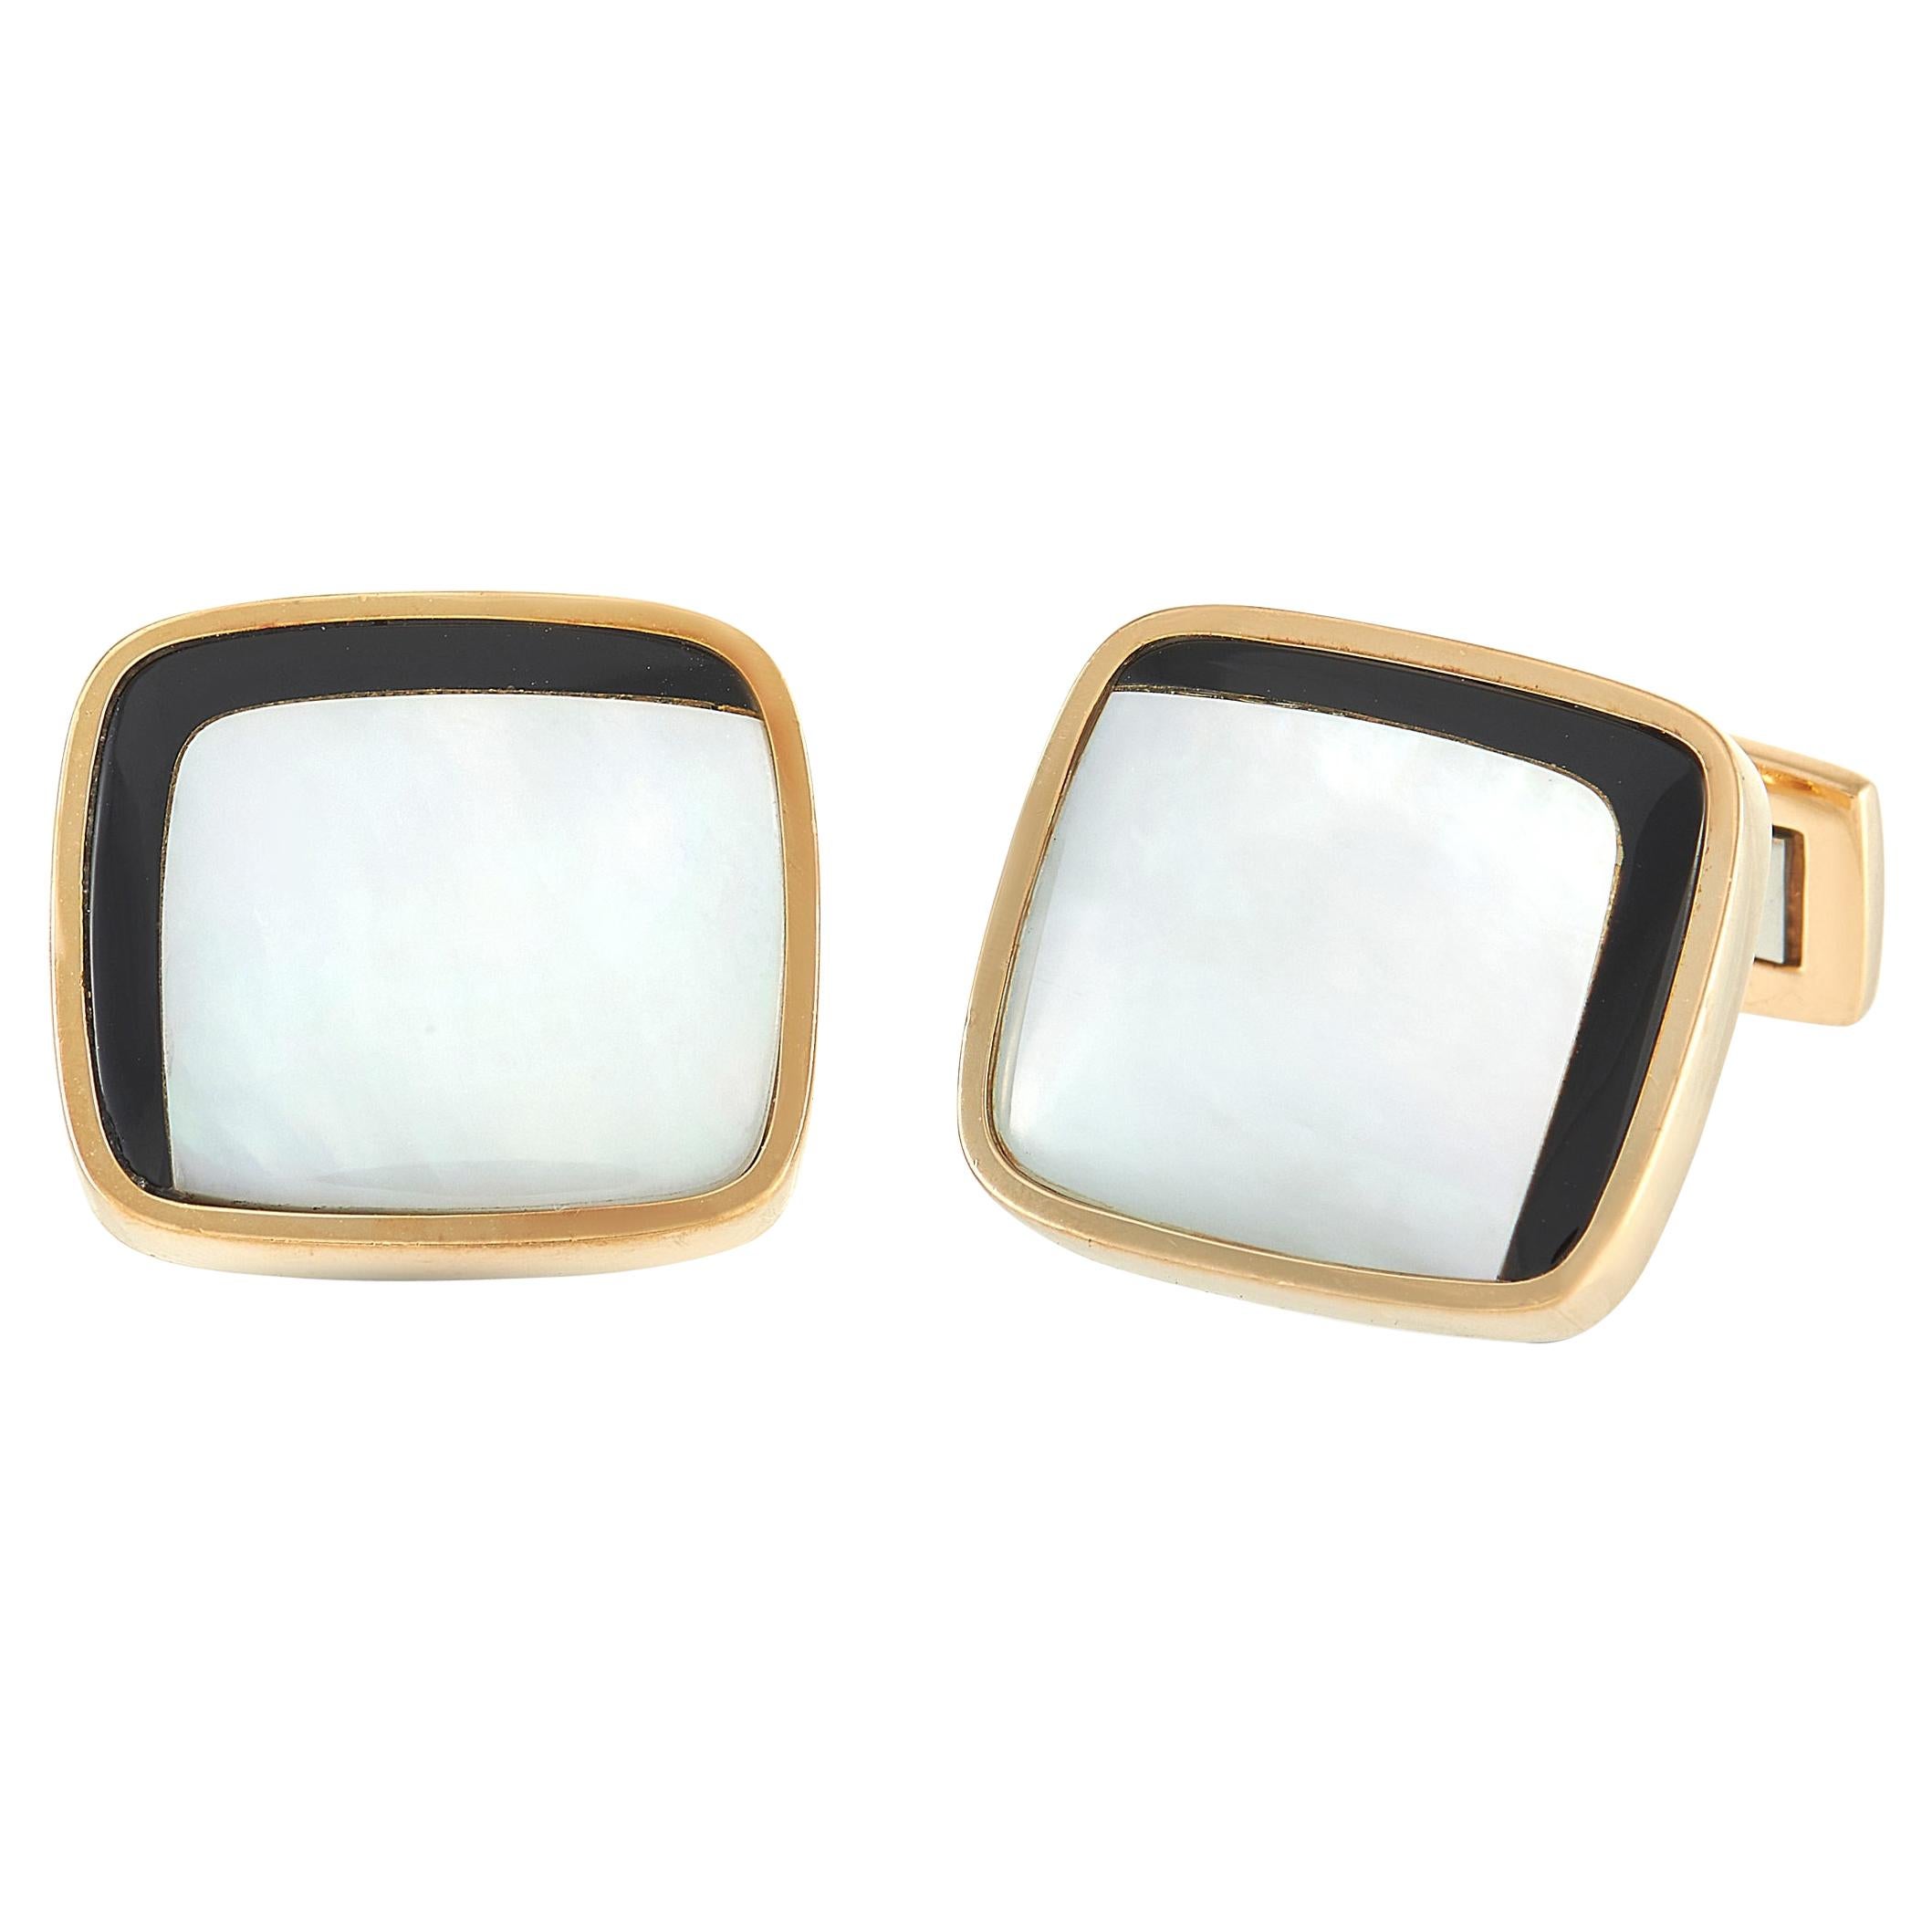 Piaget 18K Yellow Gold Onyx and Mother of Pearl Cufflinks